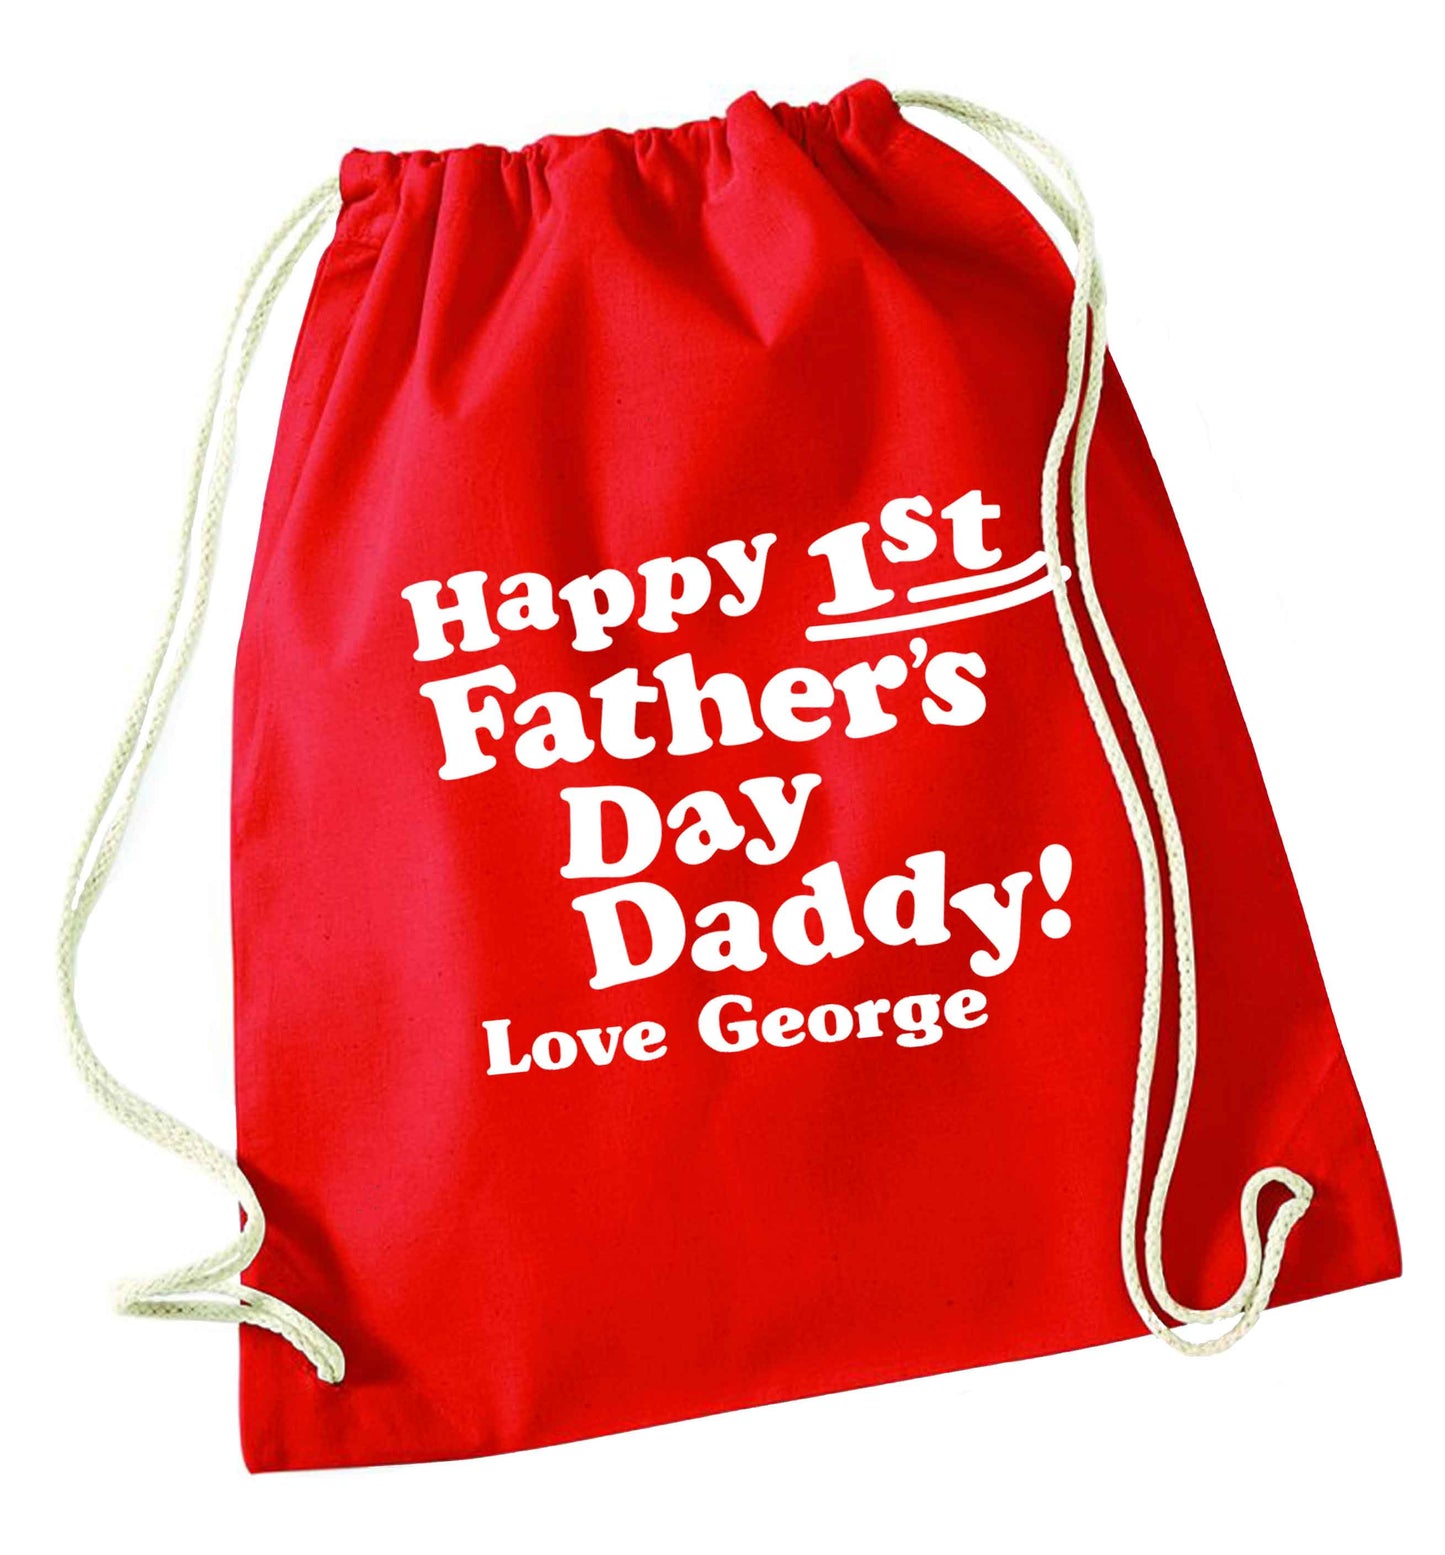 Happy first Fathers Day daddy love personalised red drawstring bag 